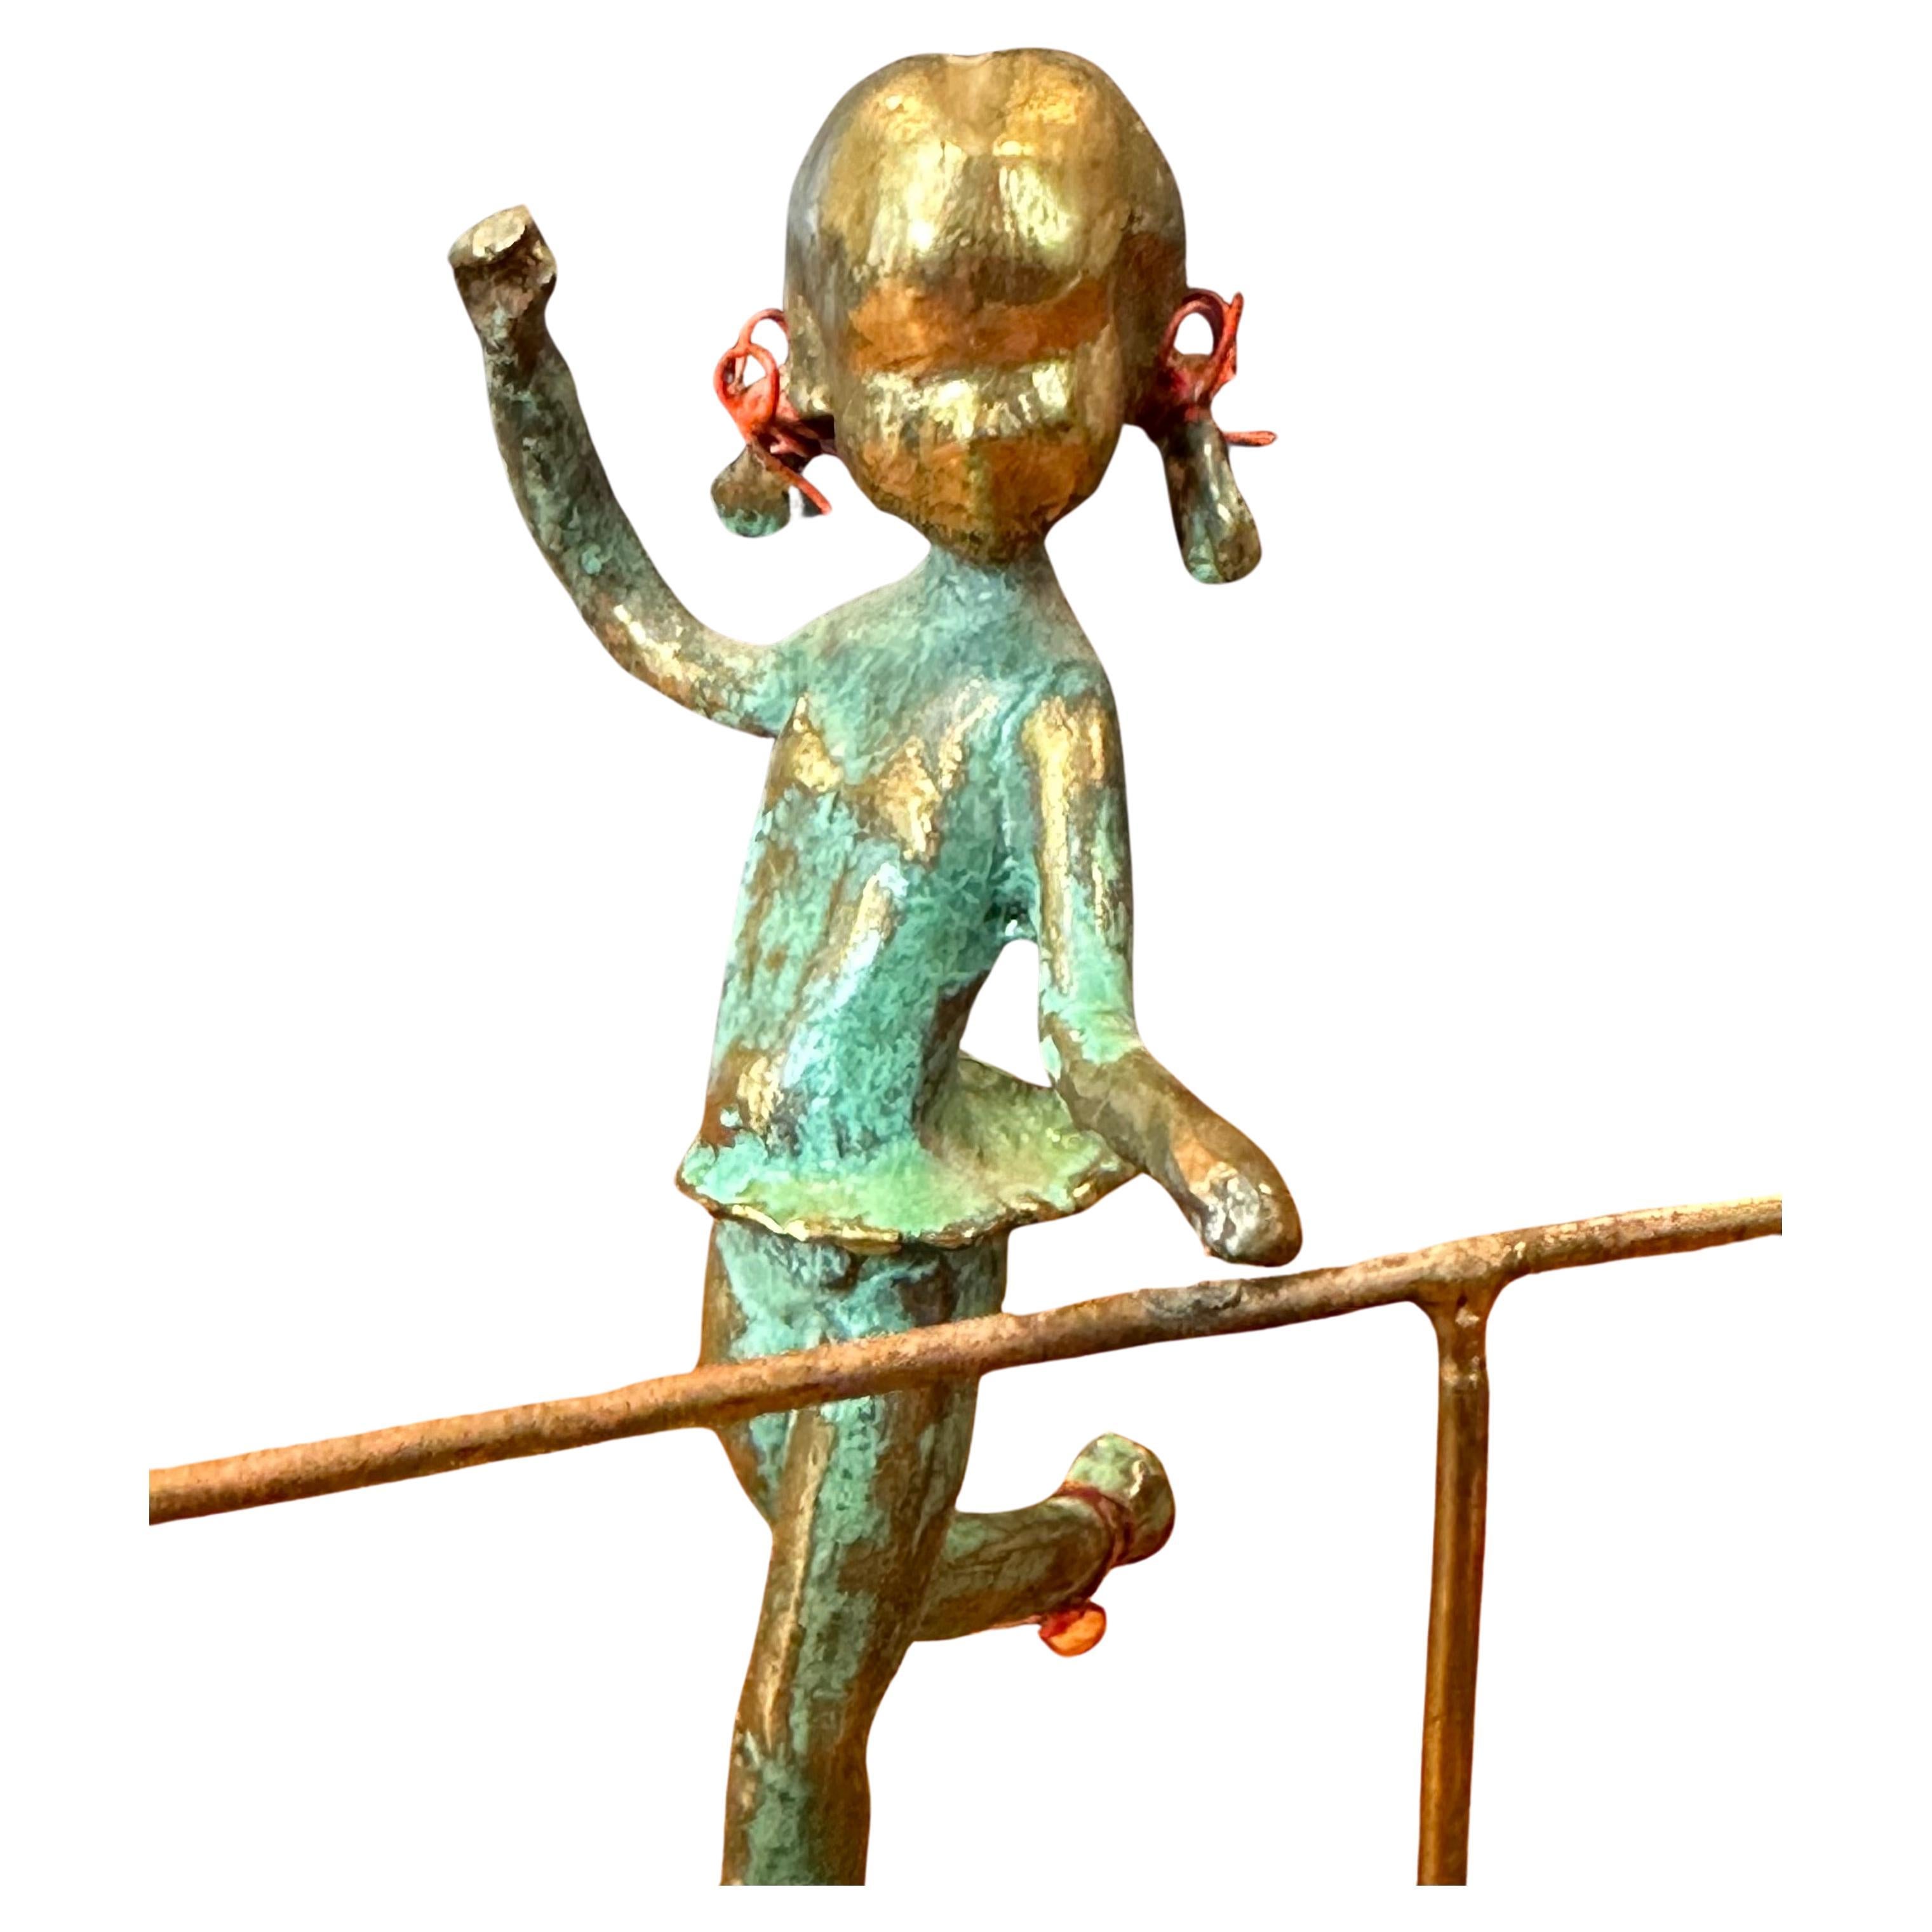 A really cool patinated bronze child ballerina sculpture by Malcolm Moran, circa 1970s. The piece is in very good vintage condition and measures 4